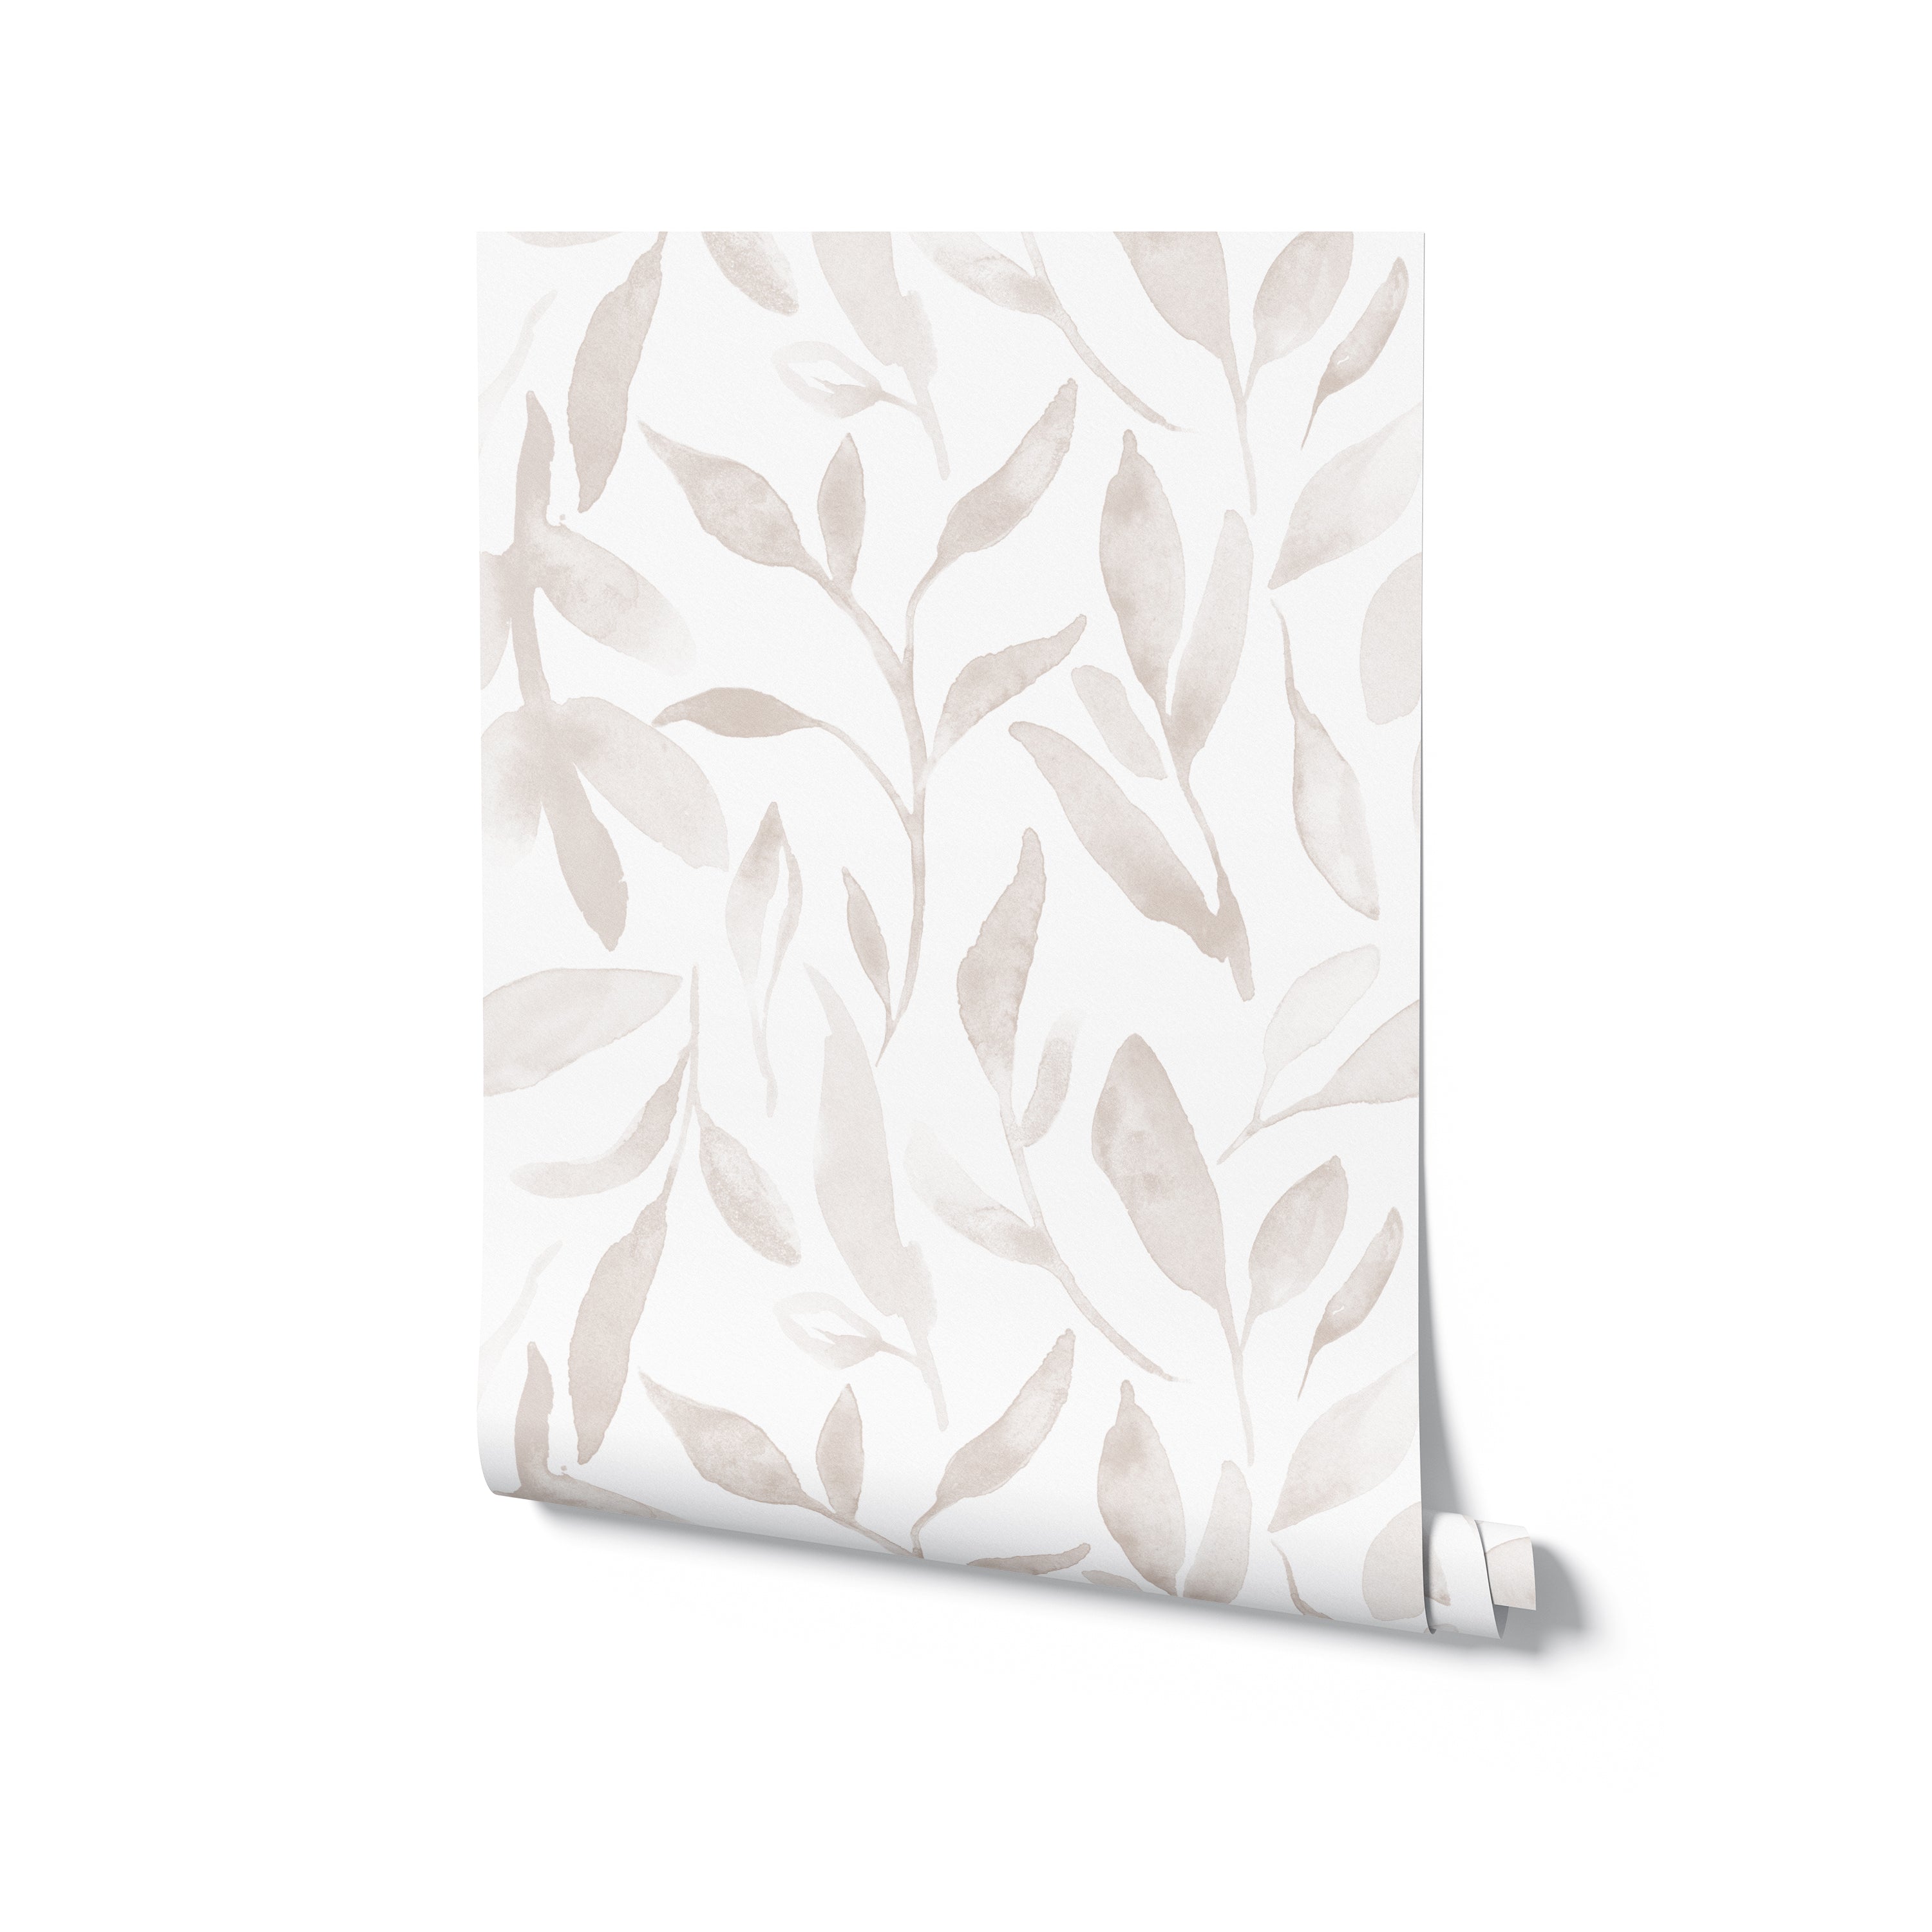 Roll of Delicate Watercolour Leaves Wallpaper, partially unrolled to reveal the hand-painted style beige leaf patterns on a white background. This wallpaper offers a soft, artistic appeal, perfect for creating a calming and elegant atmosphere in any room